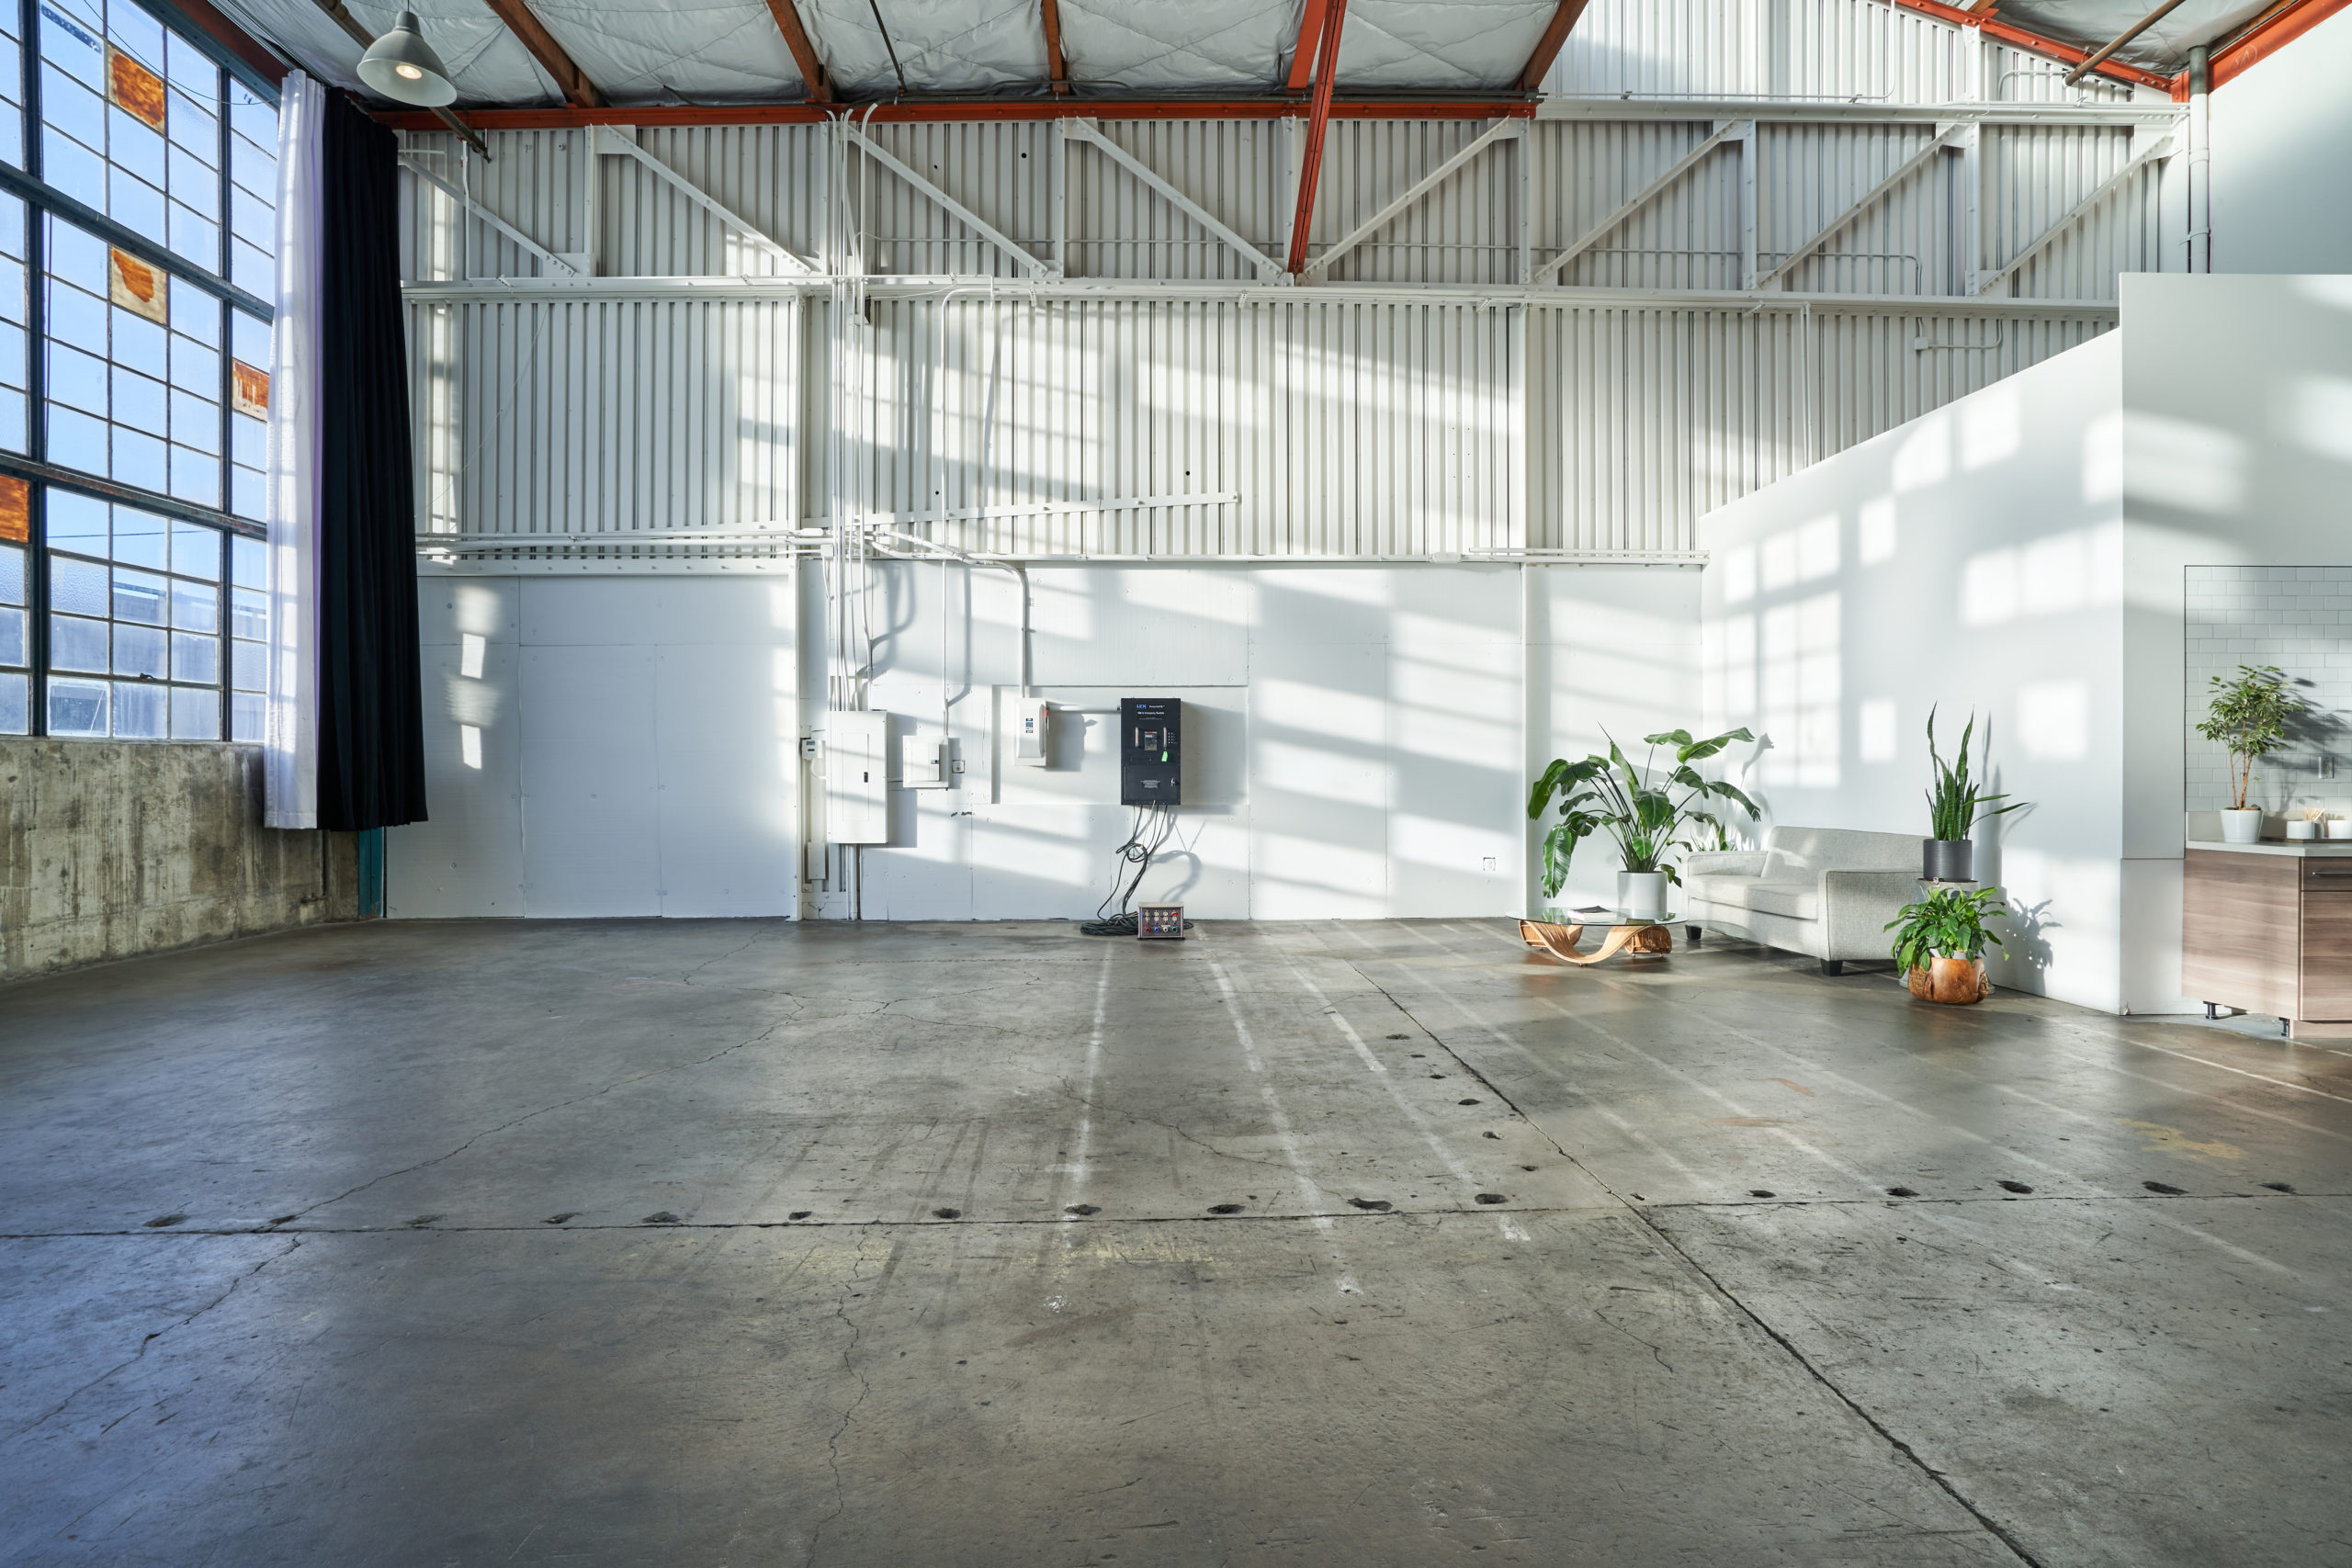 View of the white panel wall inside Studio 8. Plenty of potted green plants and lots of natural light inside this creative studio space for rent.